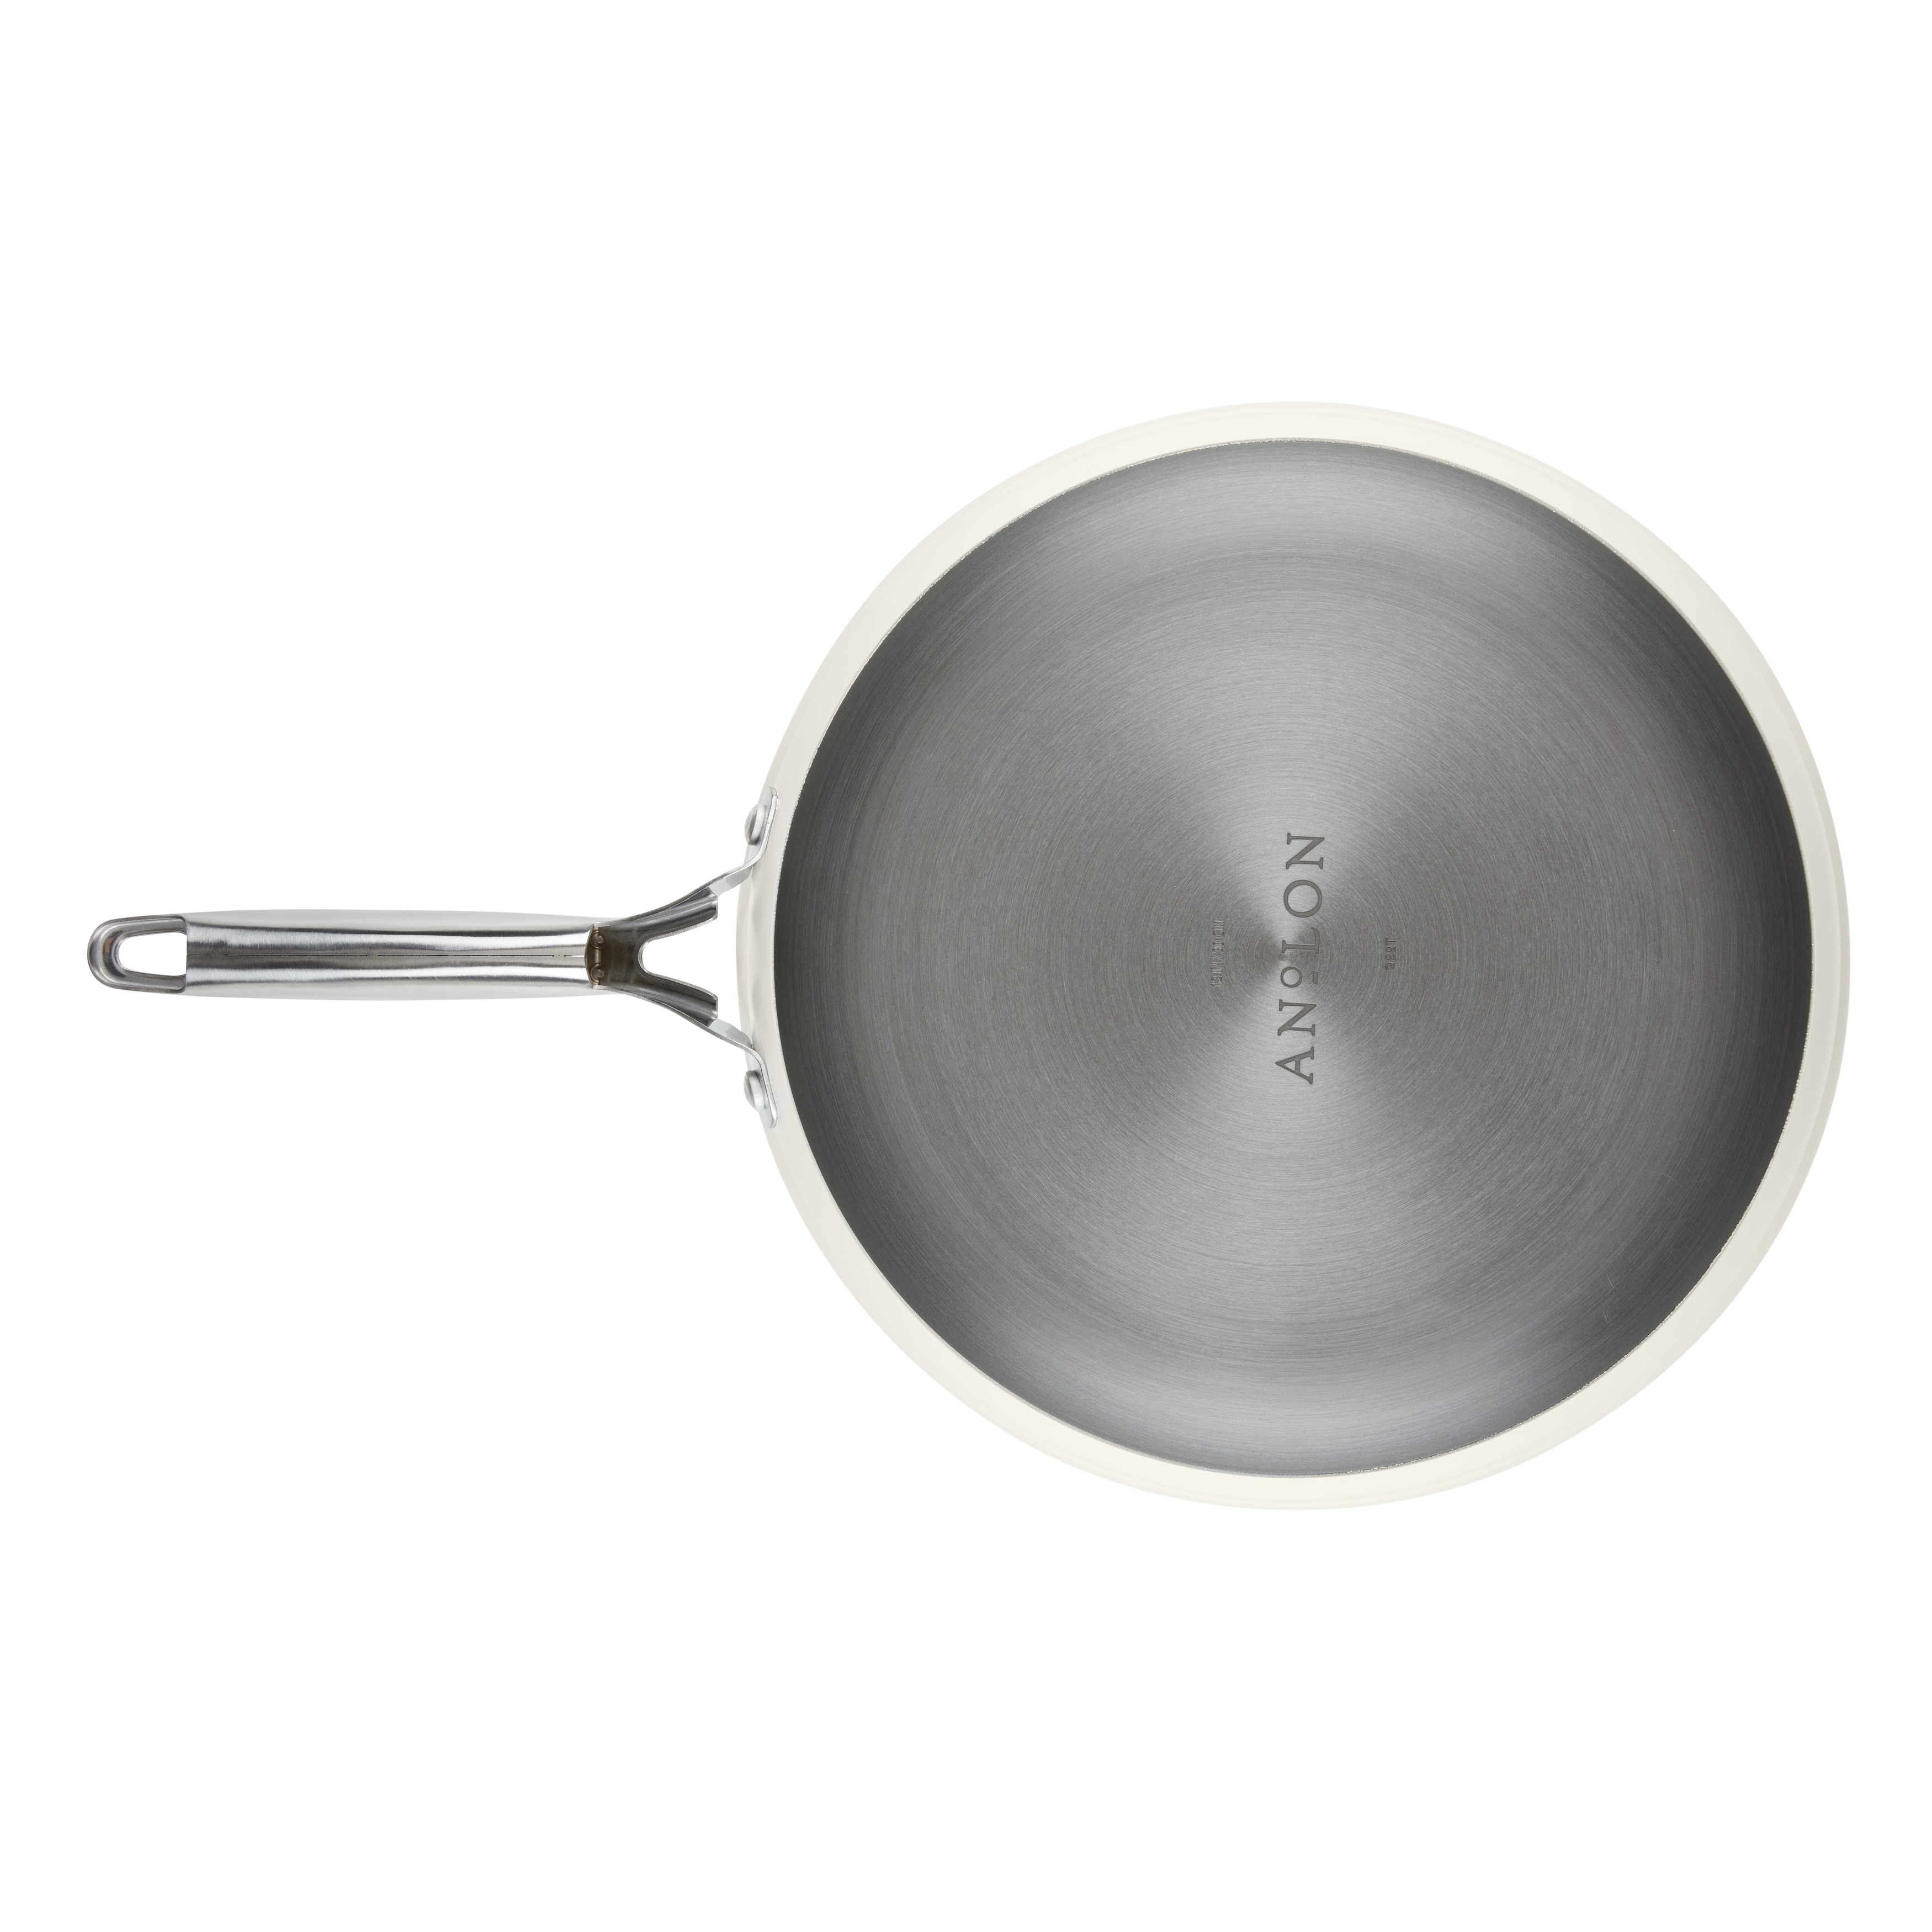 https://ak1.ostkcdn.com/images/products/is/images/direct/18a819ef1e3b2ca8471078d0ba8526e02811ad2d/Anolon-Achieve-Hard-Anodized-Nonstick-Frying-Pan%2C-12-Inch.jpg